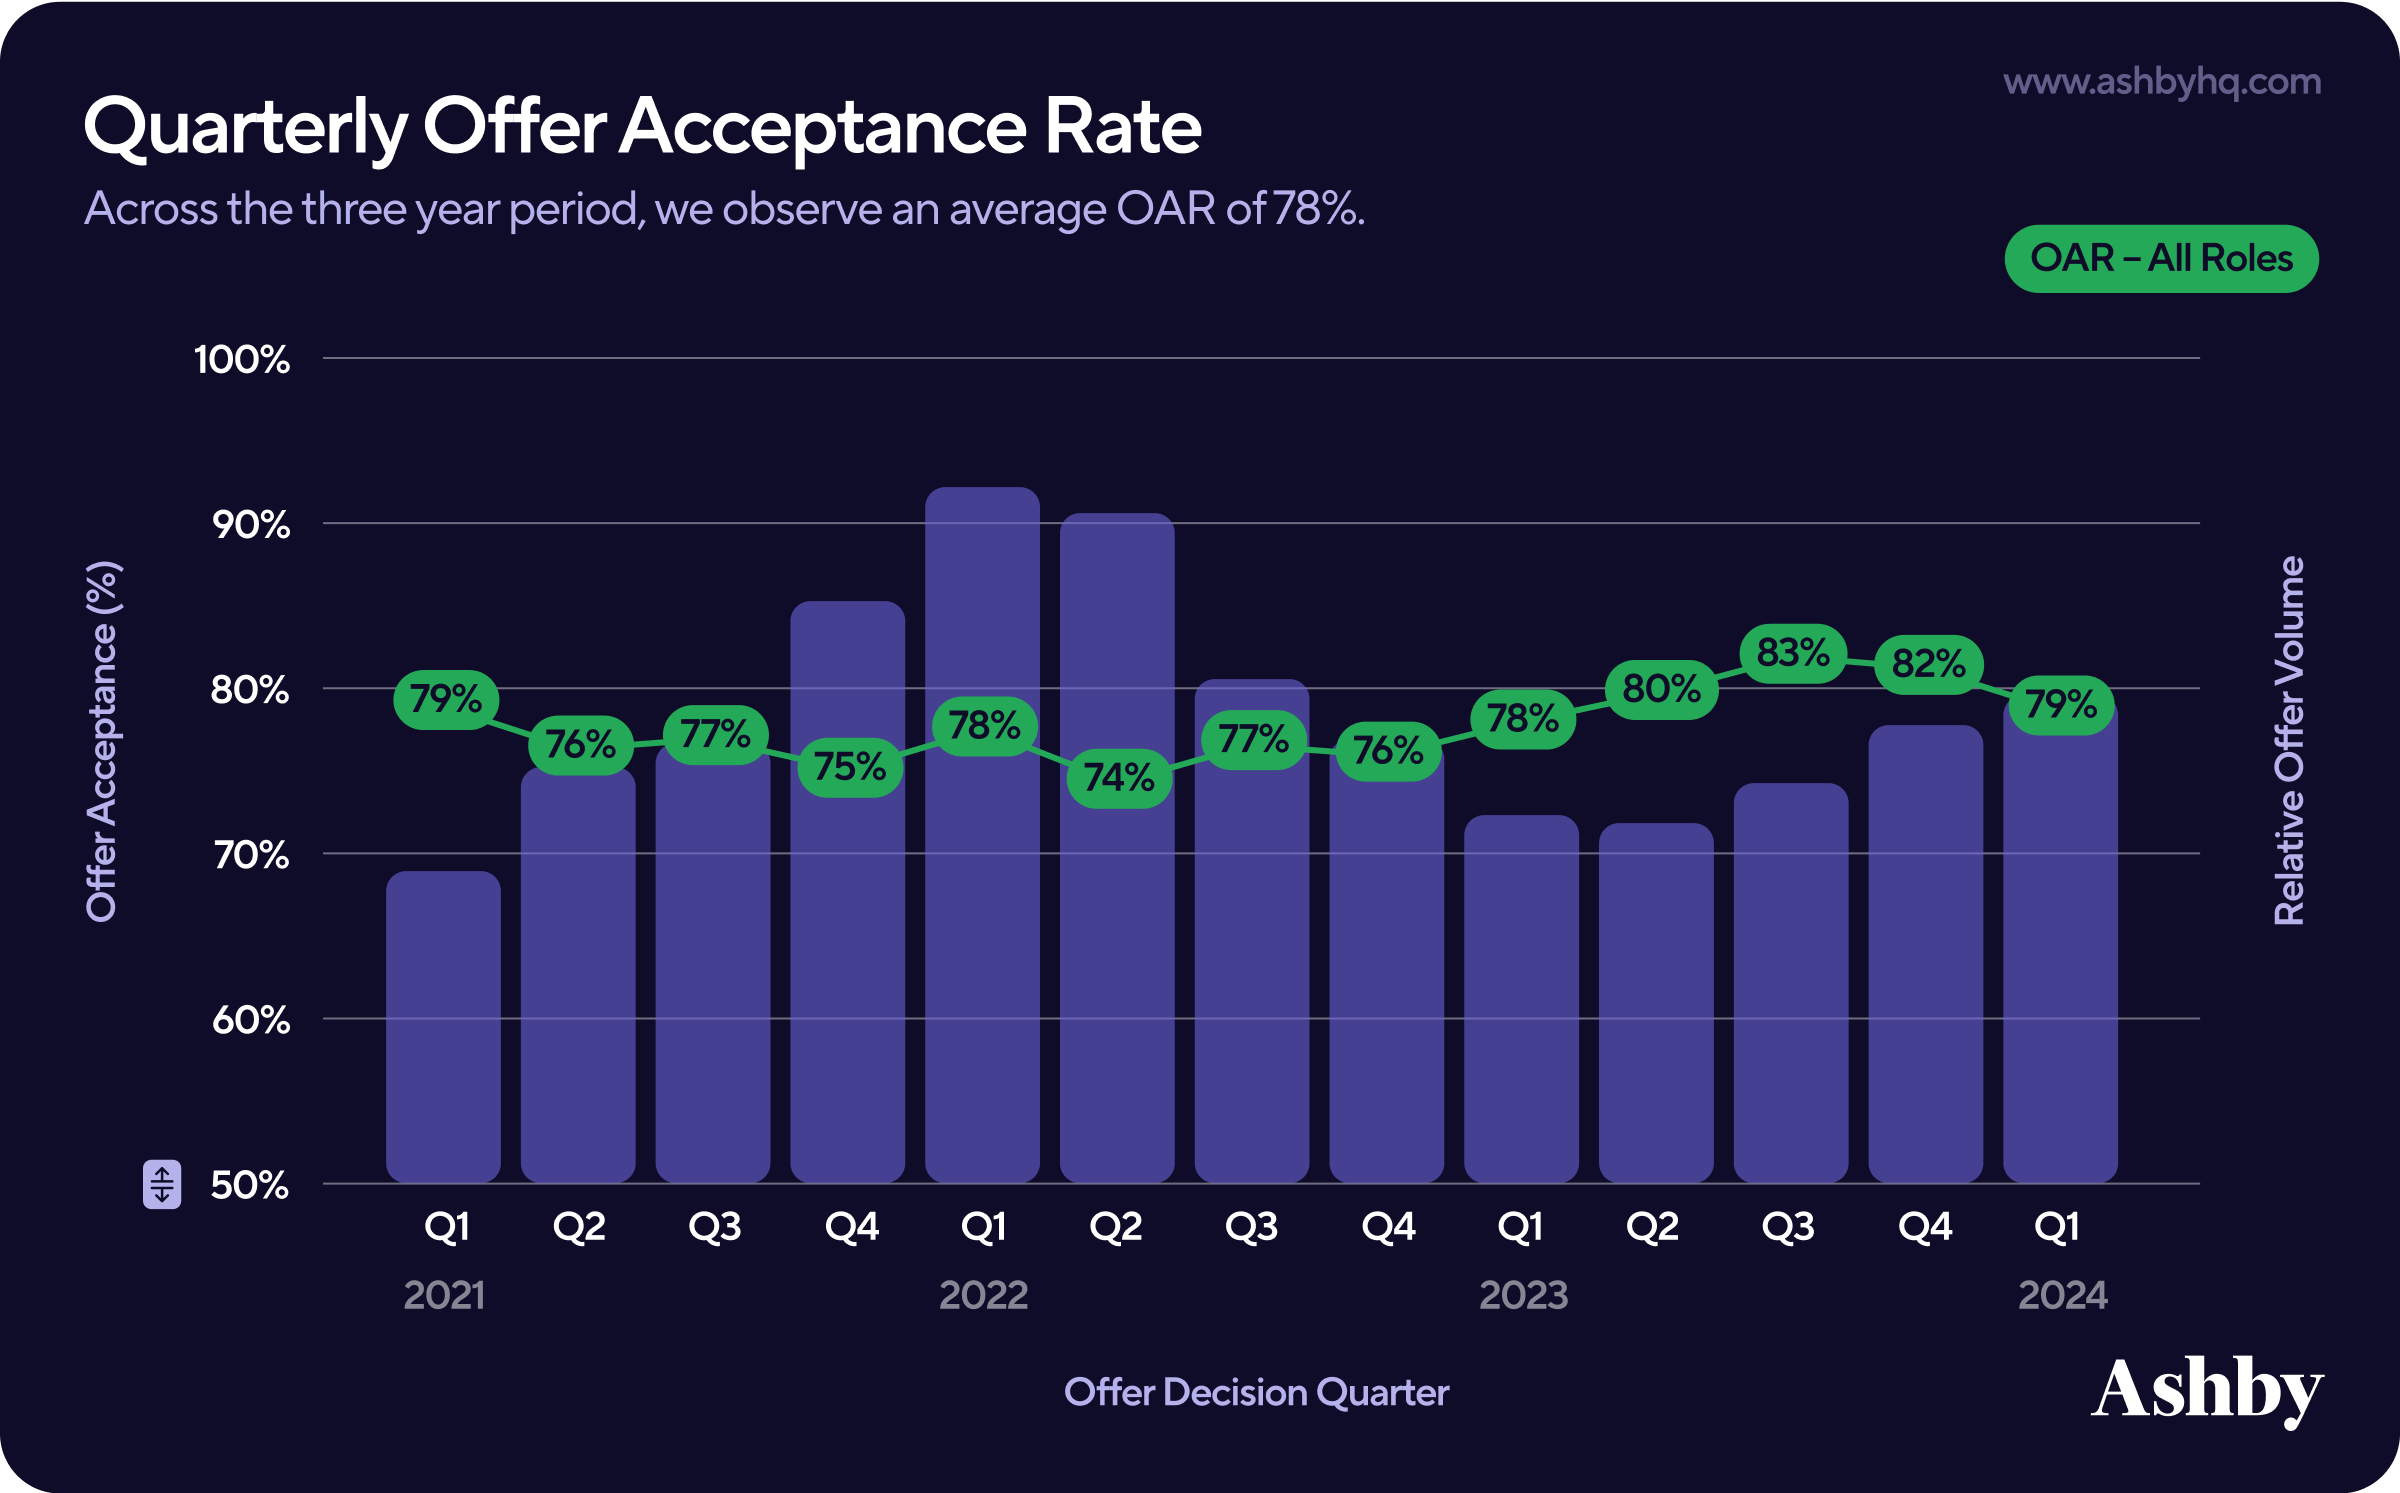 Quarterly Offer Acceptance Rates 2021, 2022, 2023